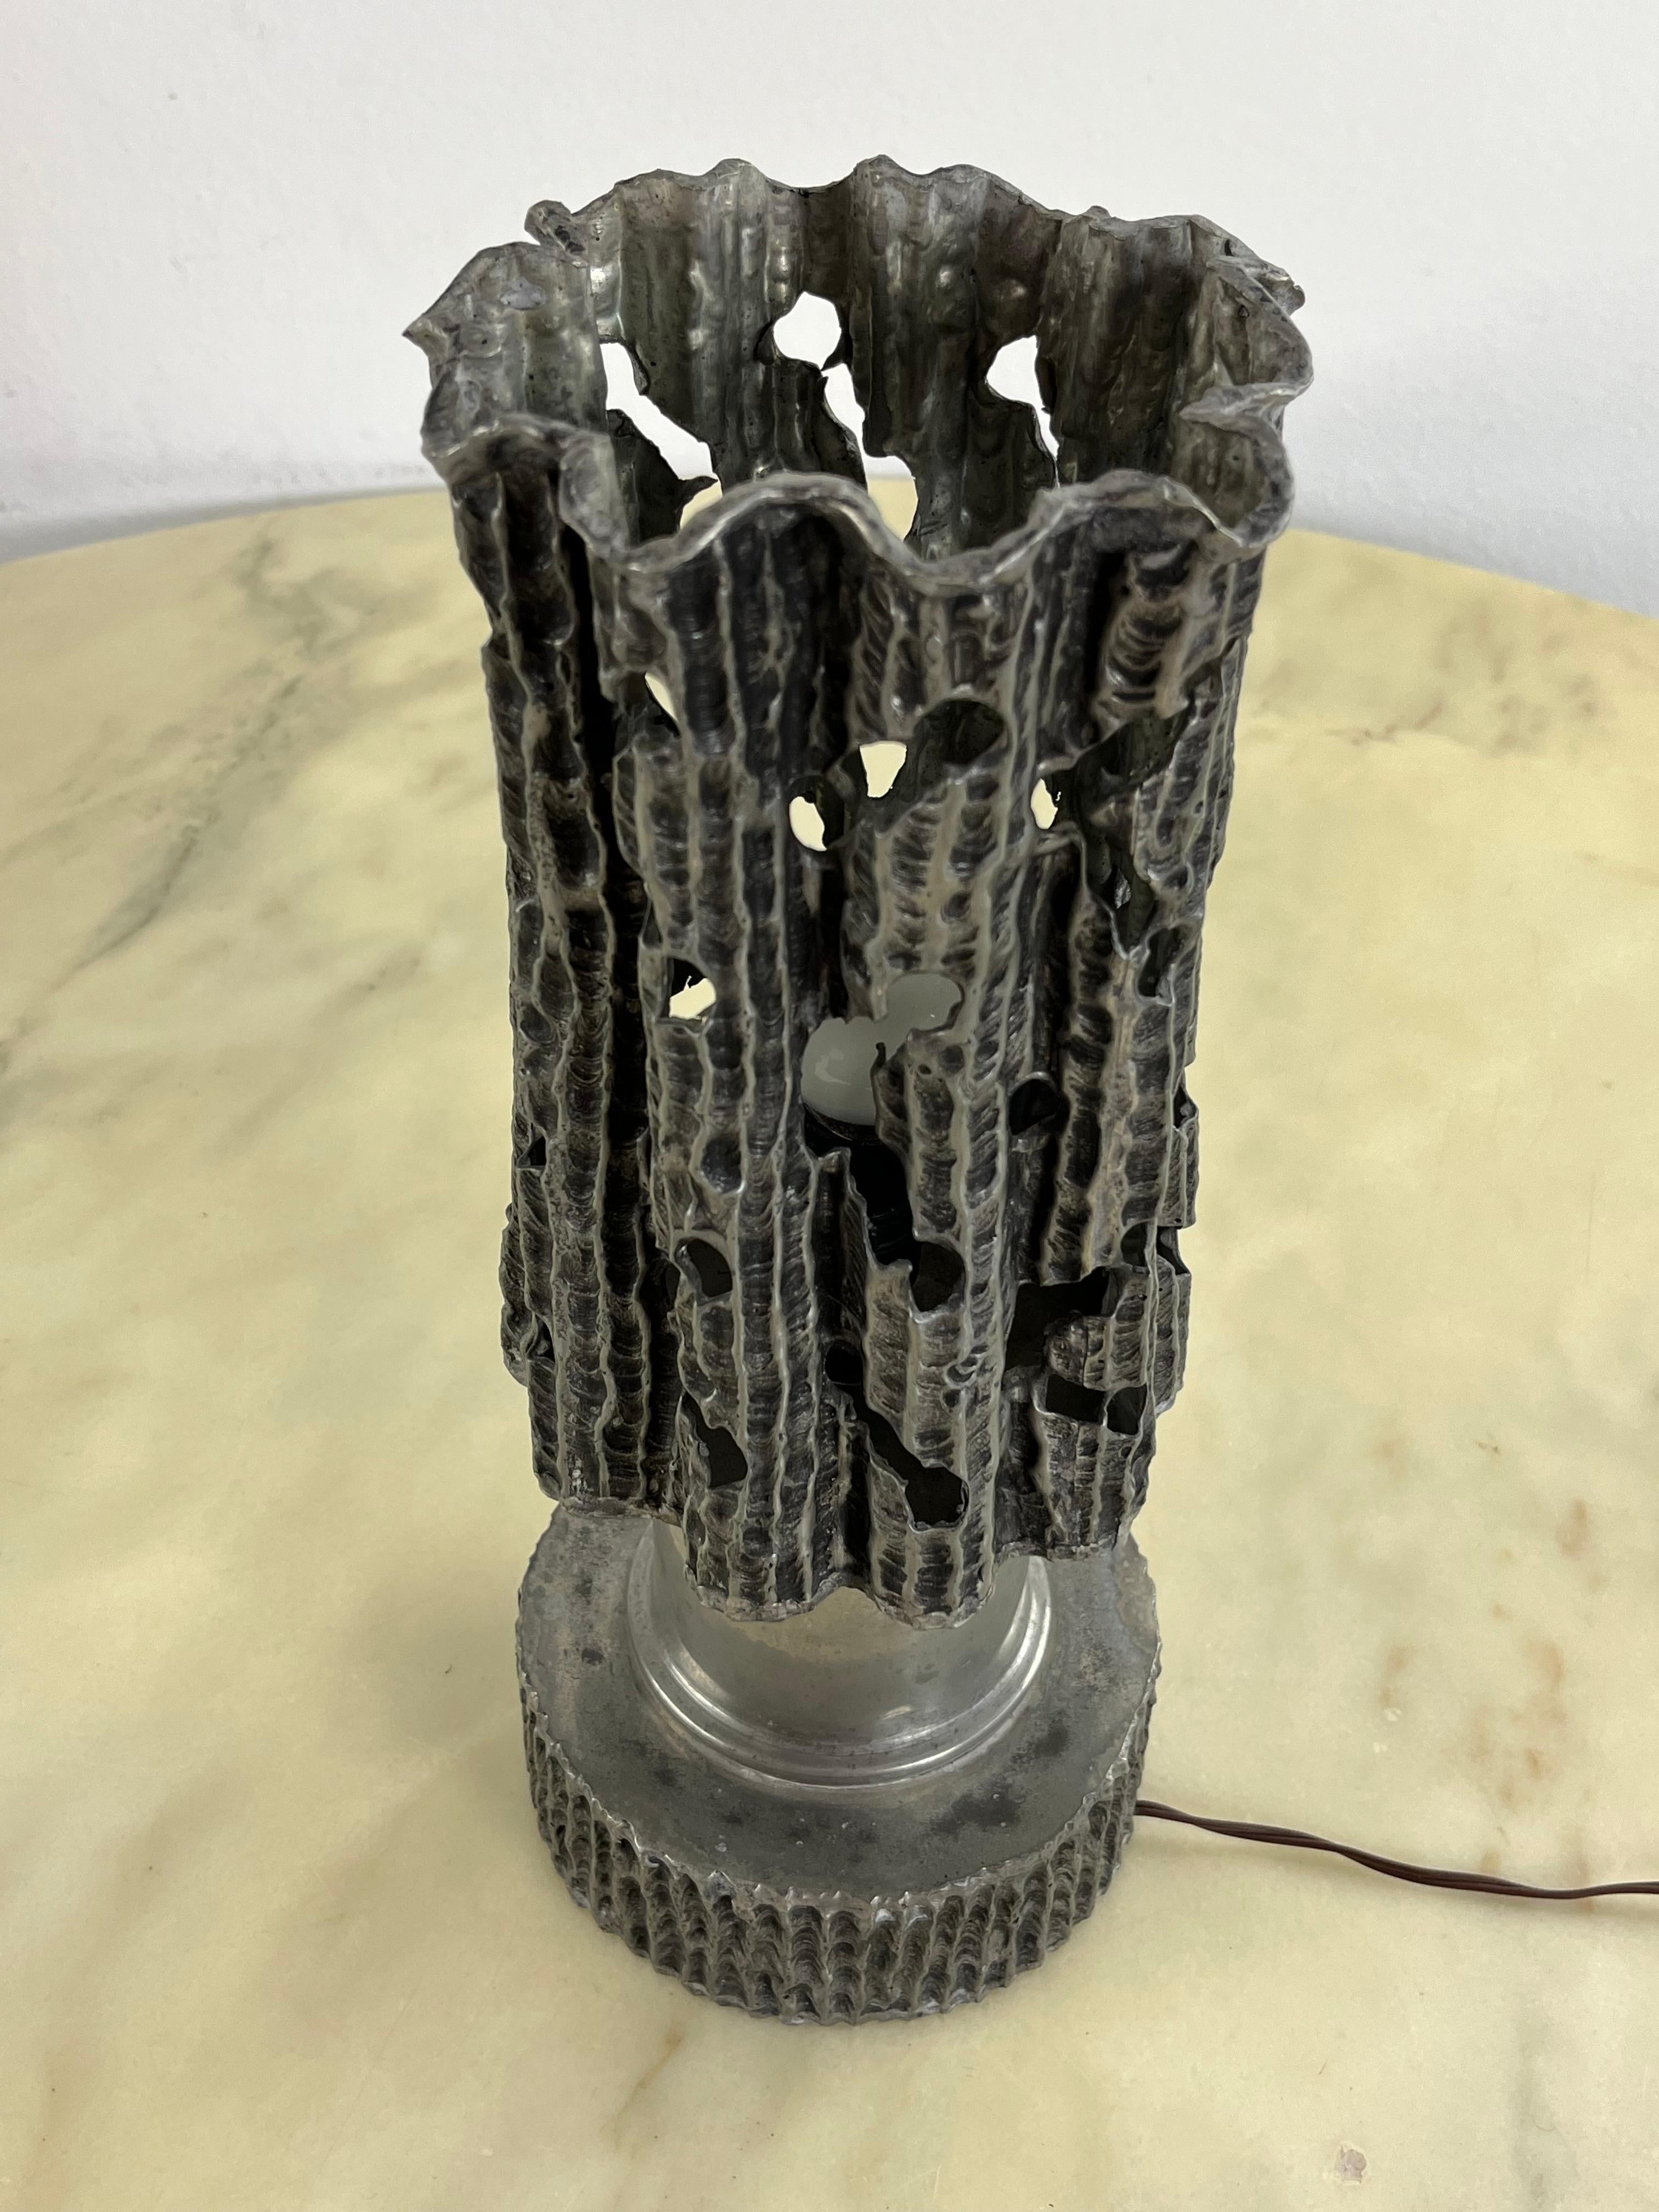 Pewter Brutalist Table Lamp Attributed to Marcello Fantoni Italian Design 1970s For Sale